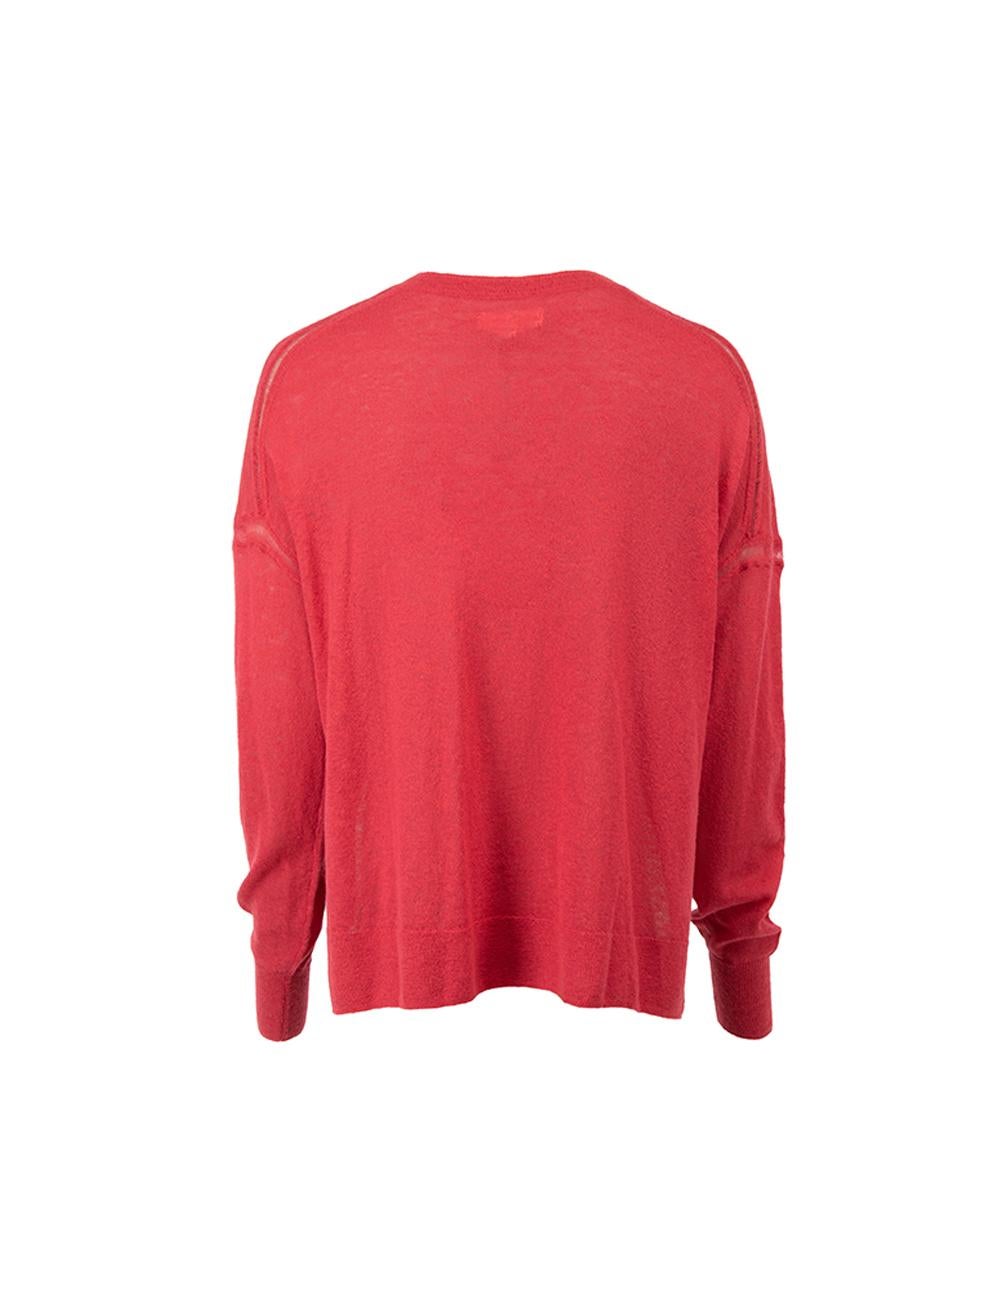 Isabel Marant Women's Isabel Marant Étoile Red V-Neck Knit Jumper In Good Condition For Sale In London, GB